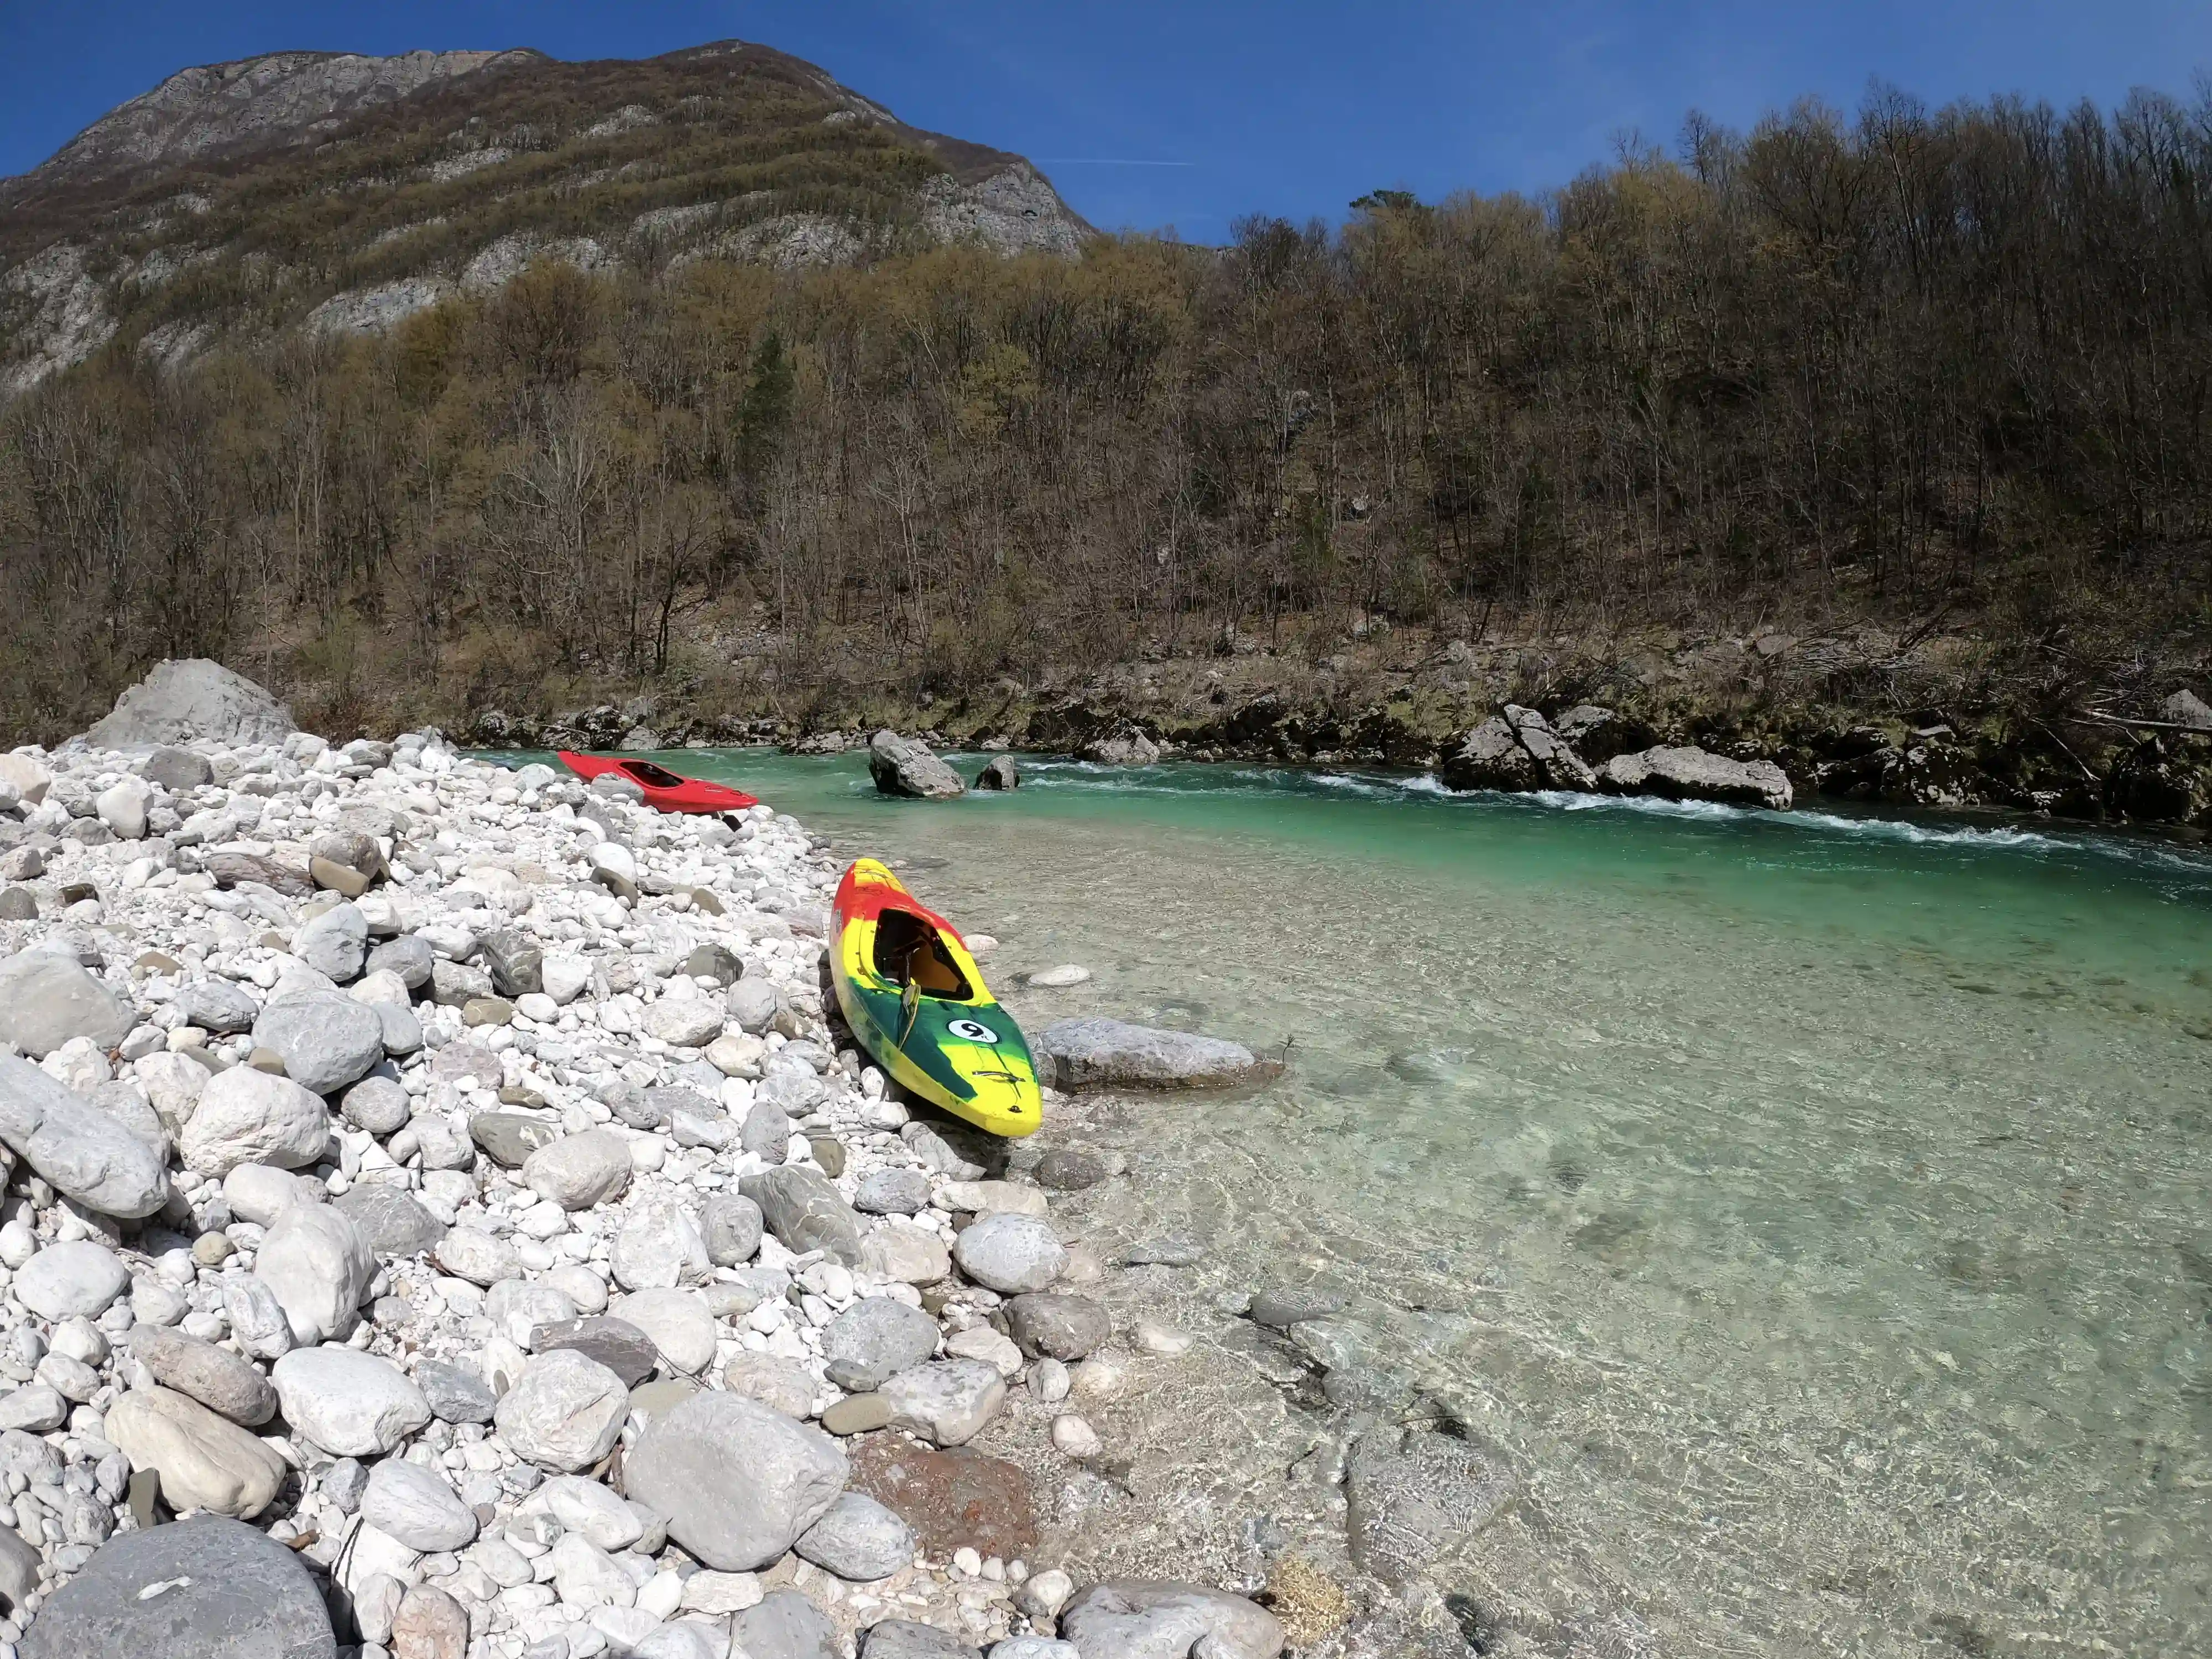 Two boats on the soca river bank